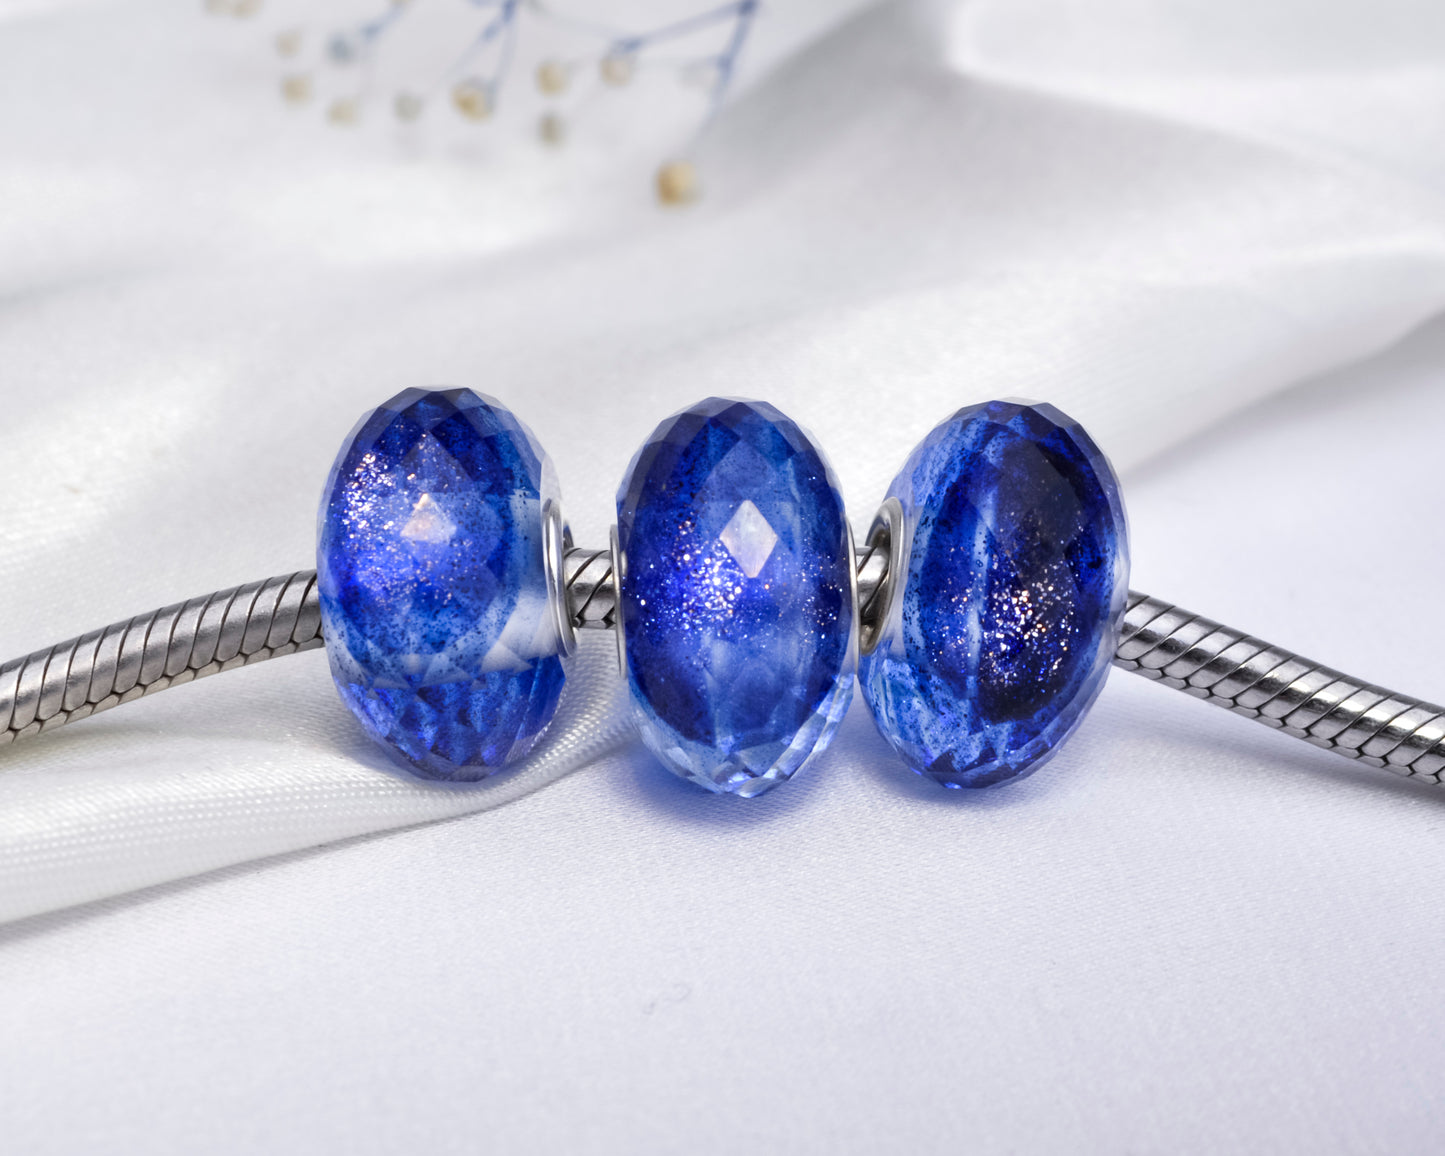 Faceted Transparent Blue Sand stone With Multi-Layered Veil Bead for European Charms Bracelets